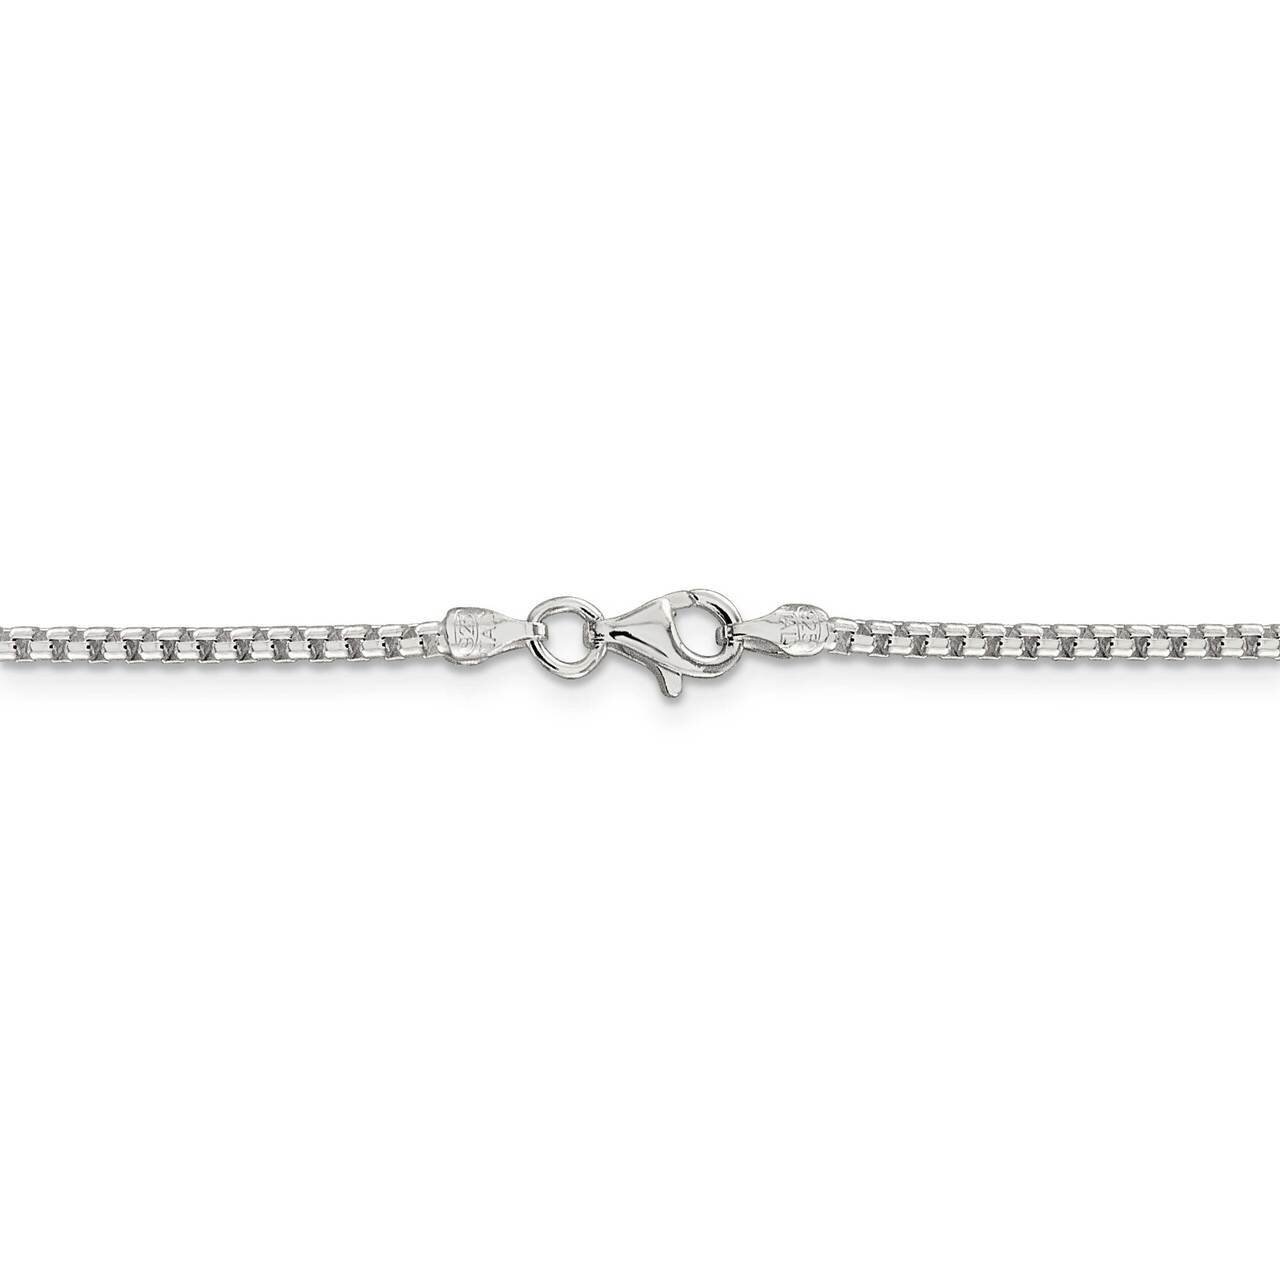 26 Inch 2mm Round Box Chain Sterling Silver QHX040-26